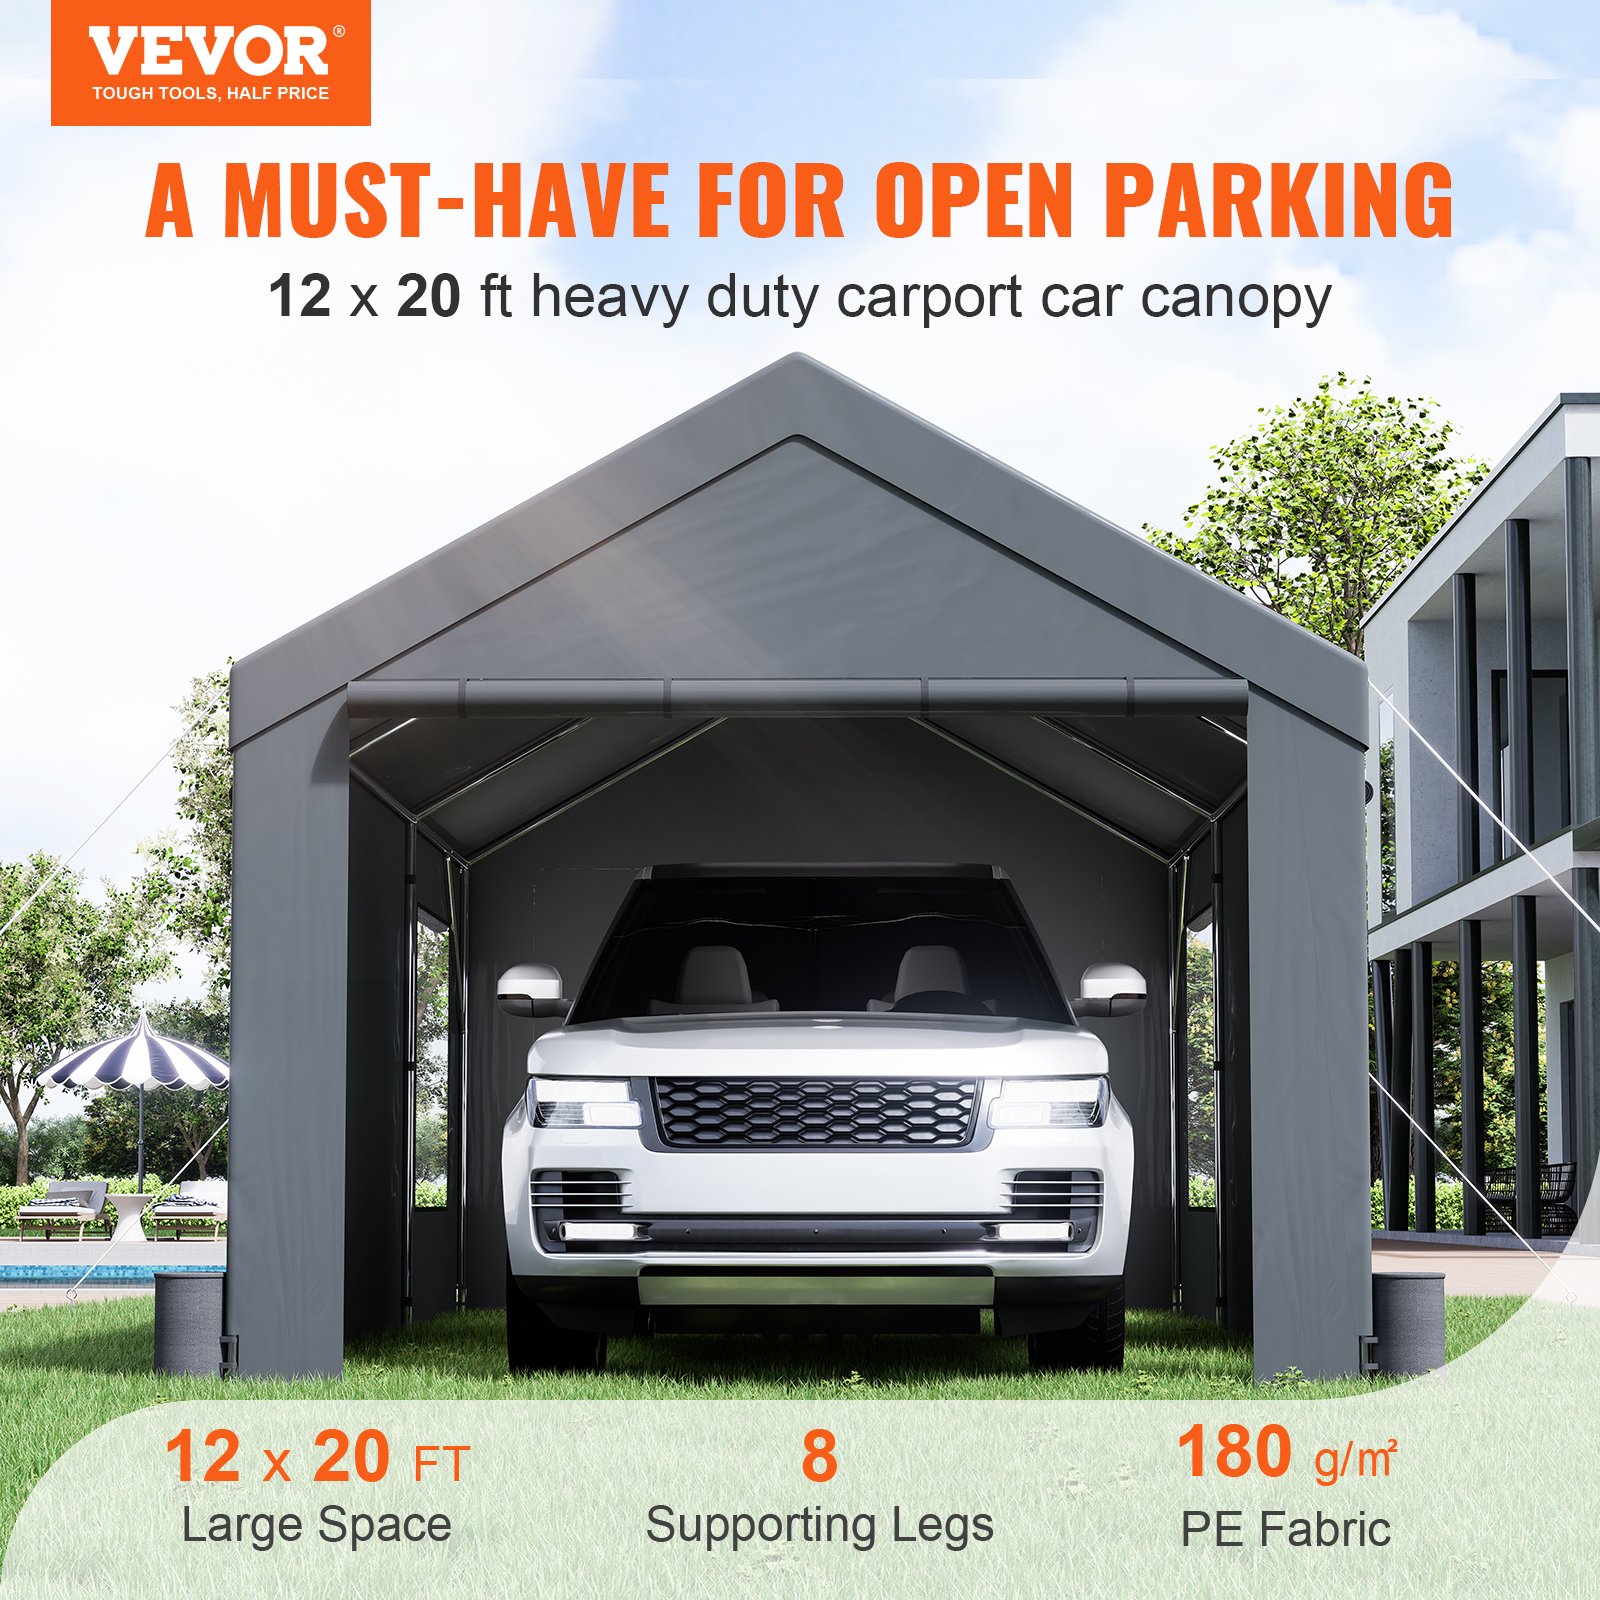 

Carport, Extra Large 12 X 20 Ft Heavy Duty Car Canopy With Roll-up Ventilated Windows, Portable Garage With Removable Sidewalls, Waterproof Uv Resistant All-season Tarp For Suv, Truck, Boat